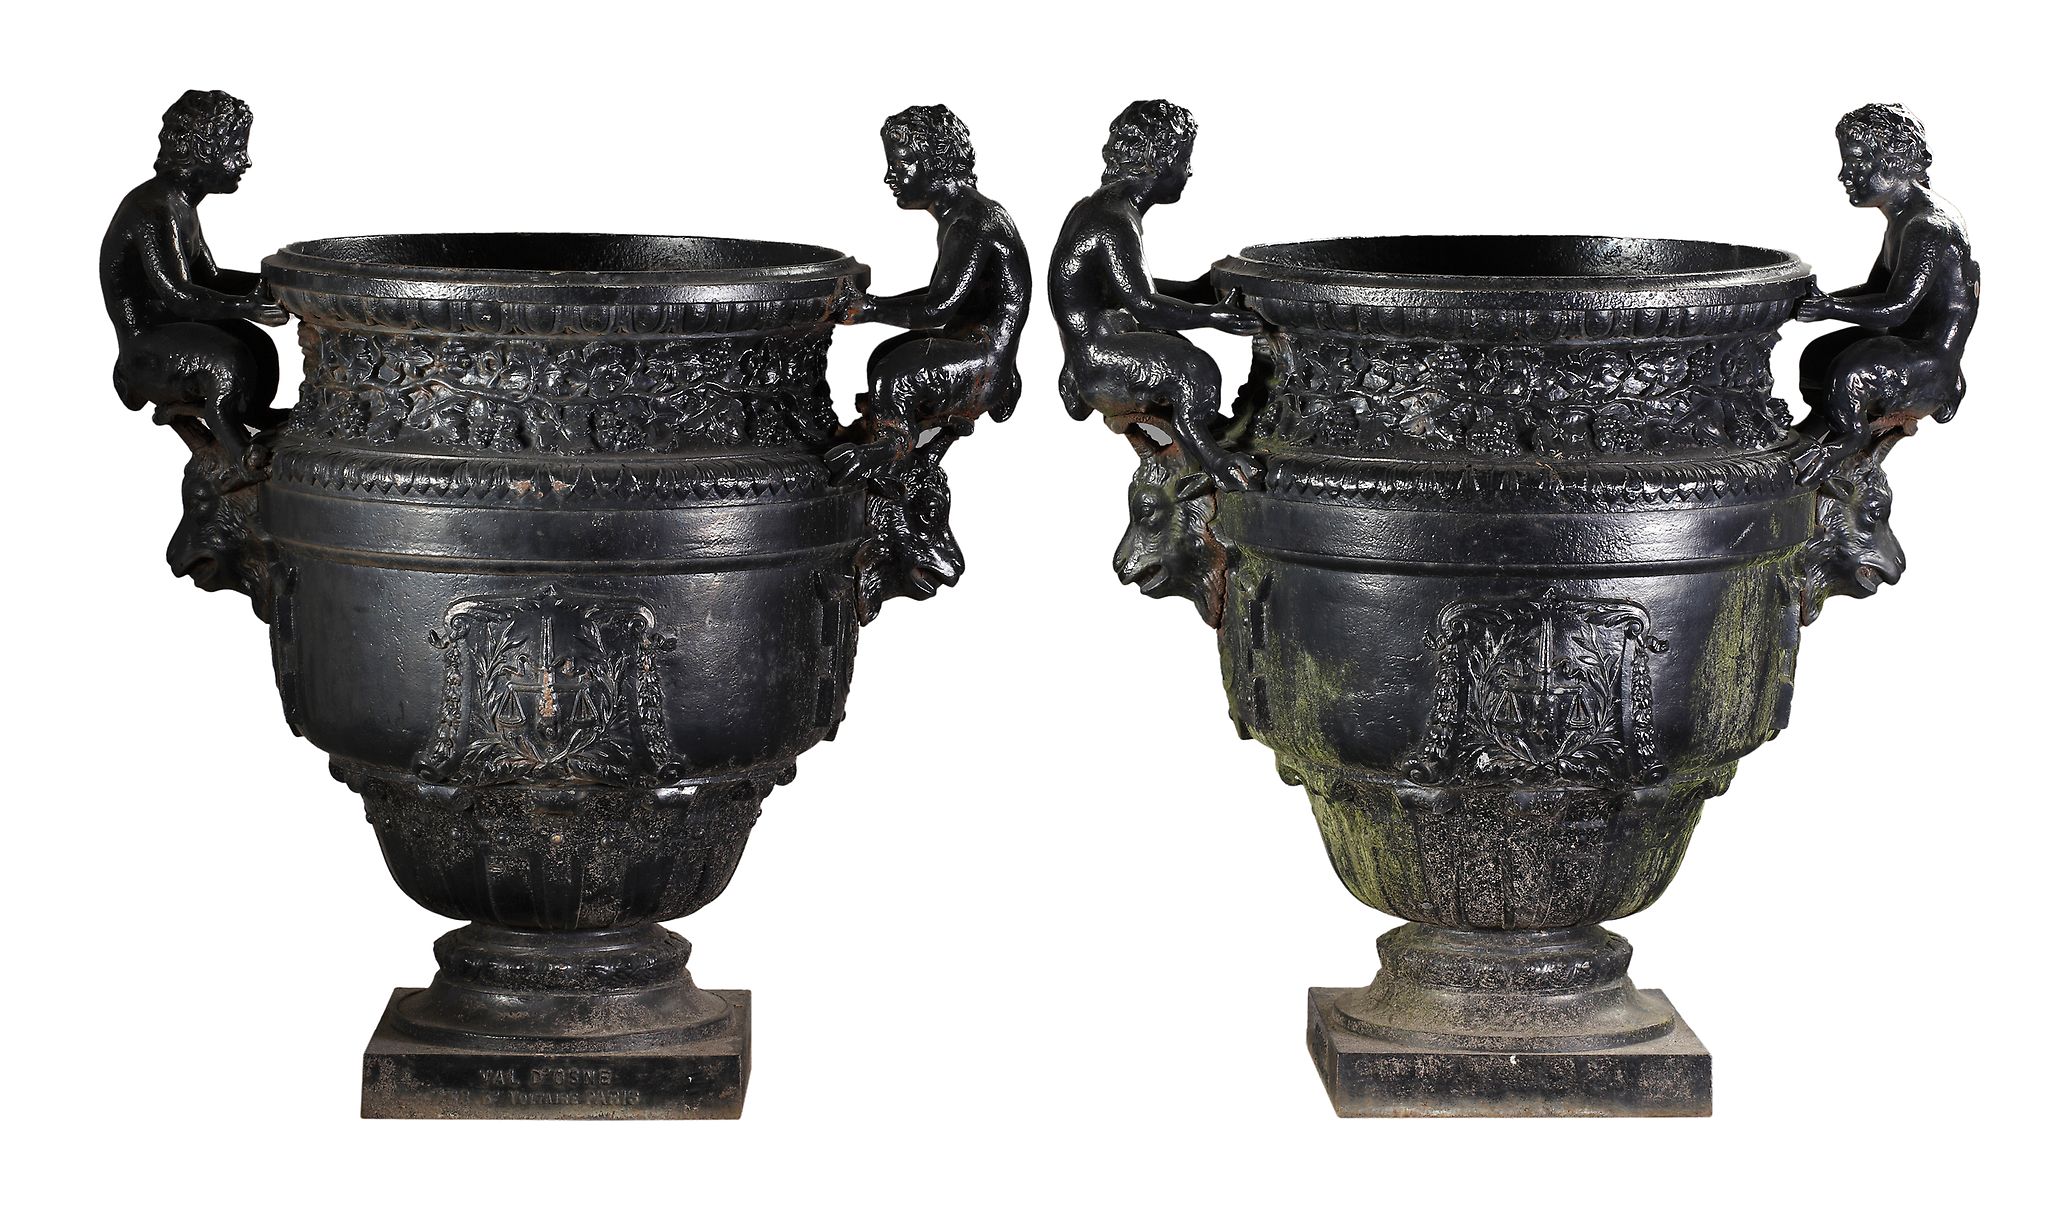 A pair of French cast iron vases after Calla's bronze urn at Versailles  A pair of French cast